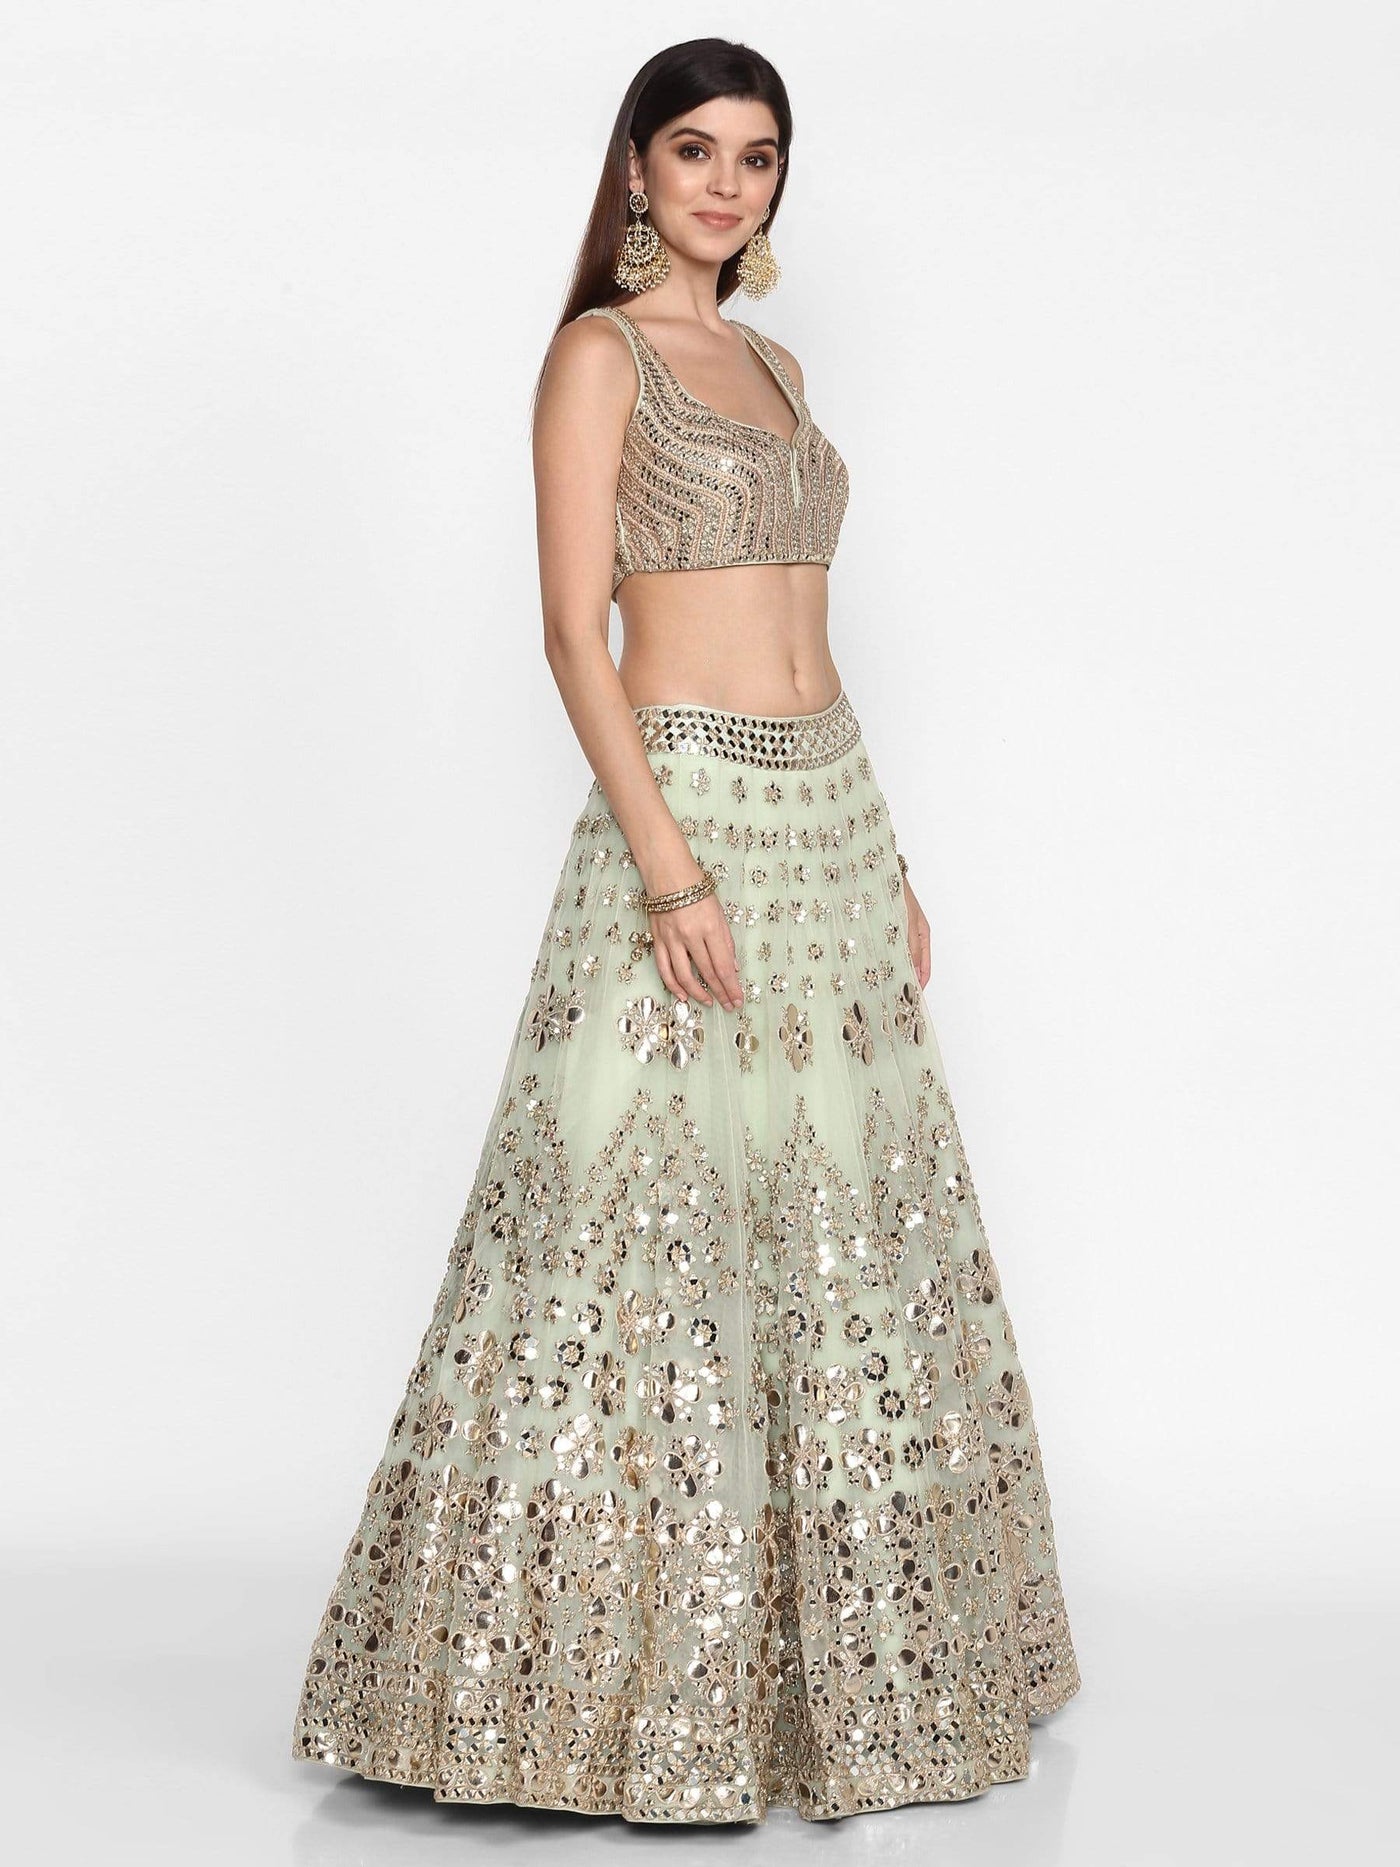 Pastel Green Lehenga - Indian Clothing in Denver, CO, Aurora, CO, Boulder, CO, Fort Collins, CO, Colorado Springs, CO, Parker, CO, Highlands Ranch, CO, Cherry Creek, CO, Centennial, CO, and Longmont, CO. Nationwide shipping USA - India Fashion X